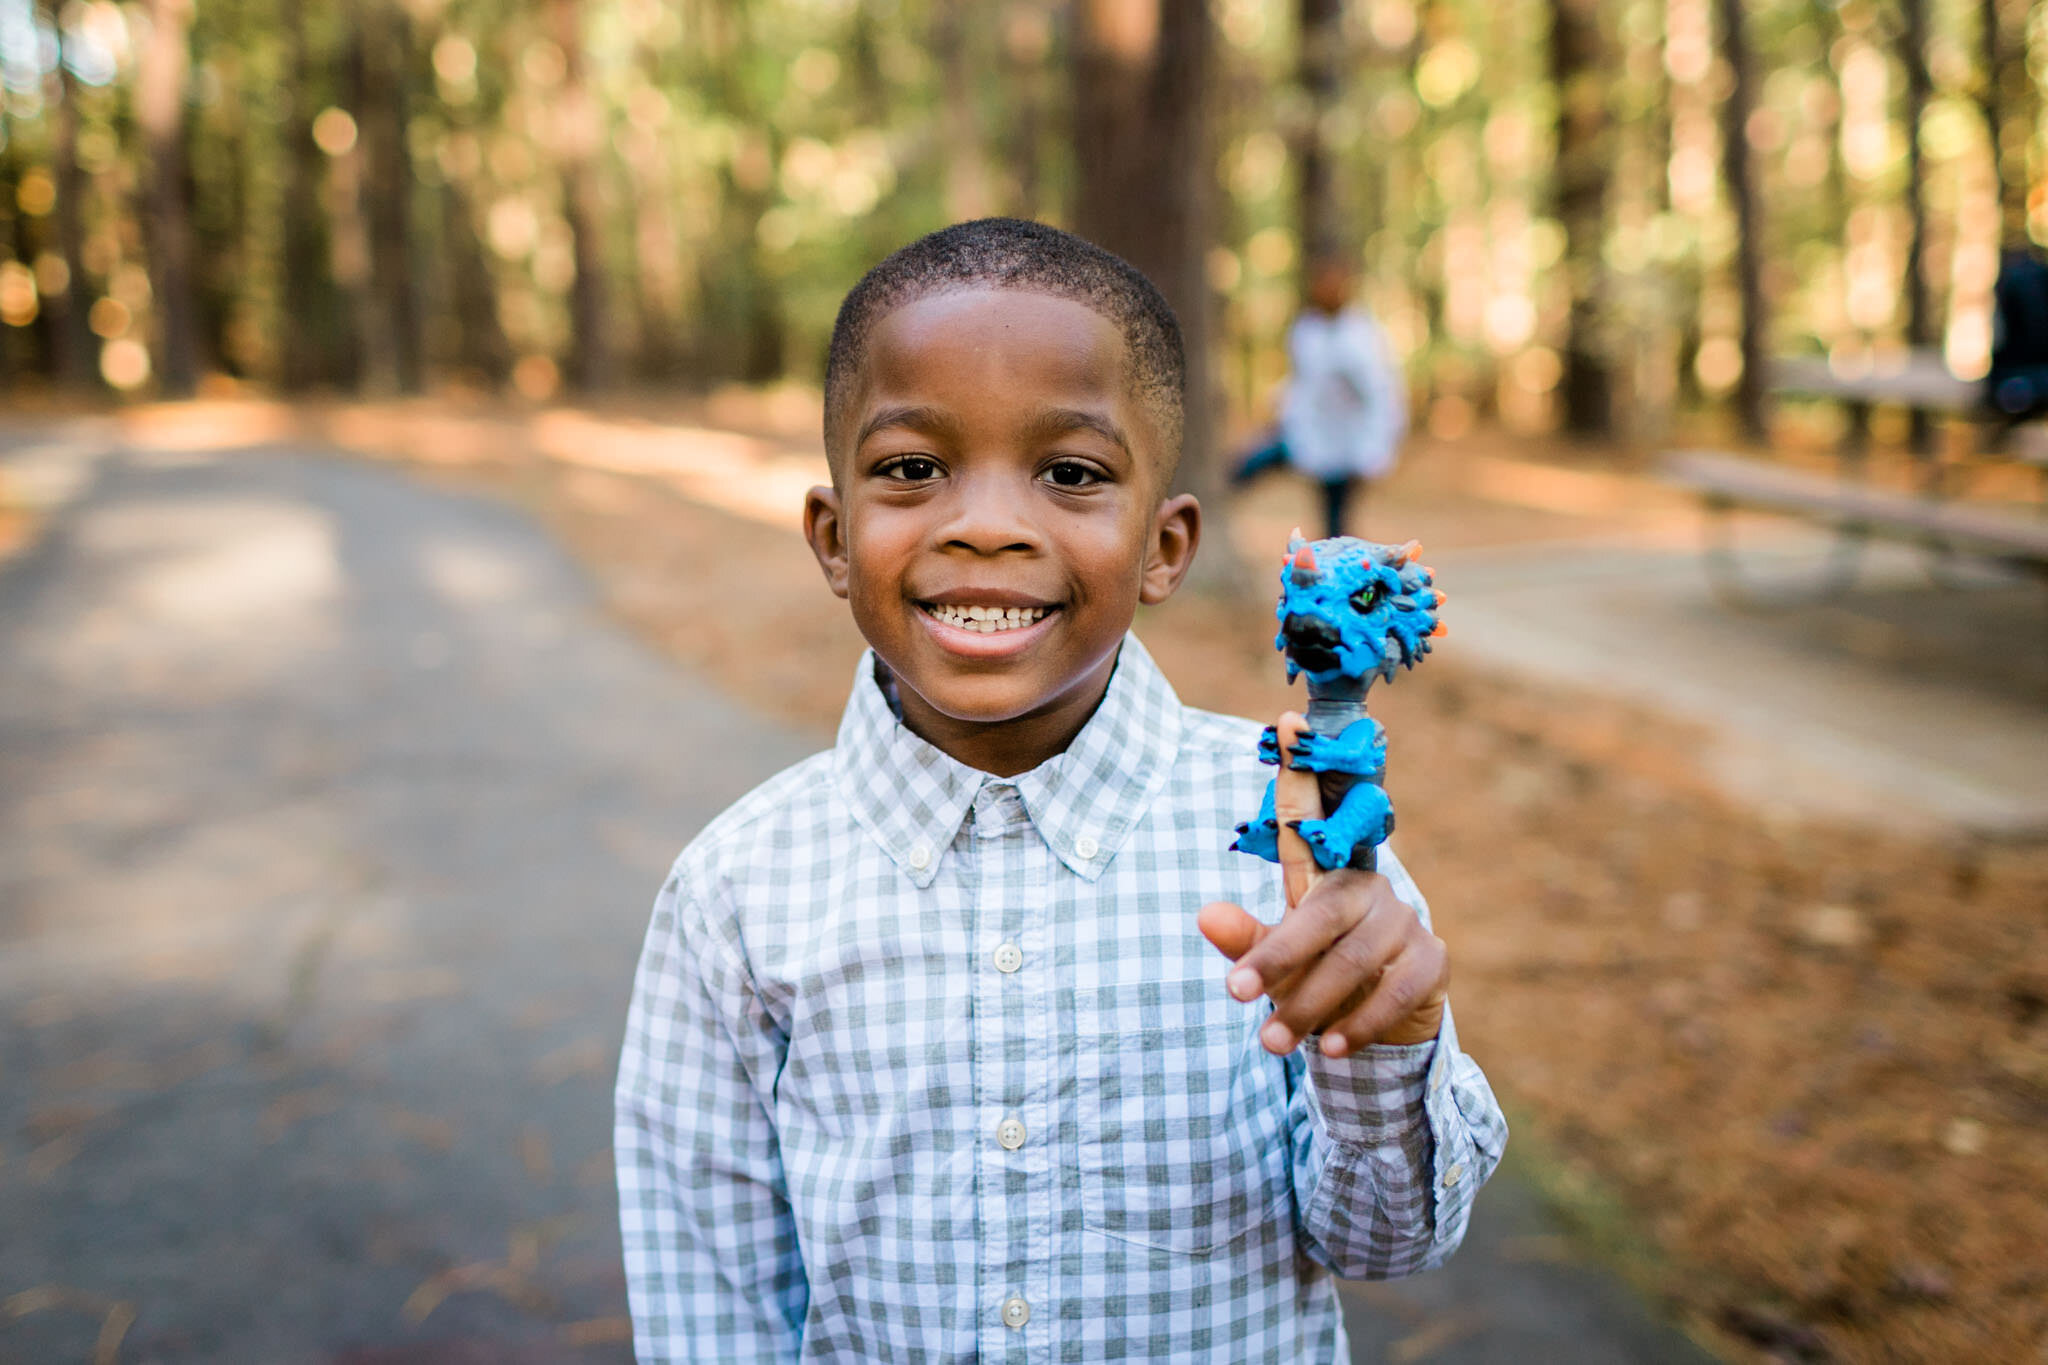 Raleigh Family Photographer | By G. Lin Photography | Umstead Park | Young boy holding up figurine